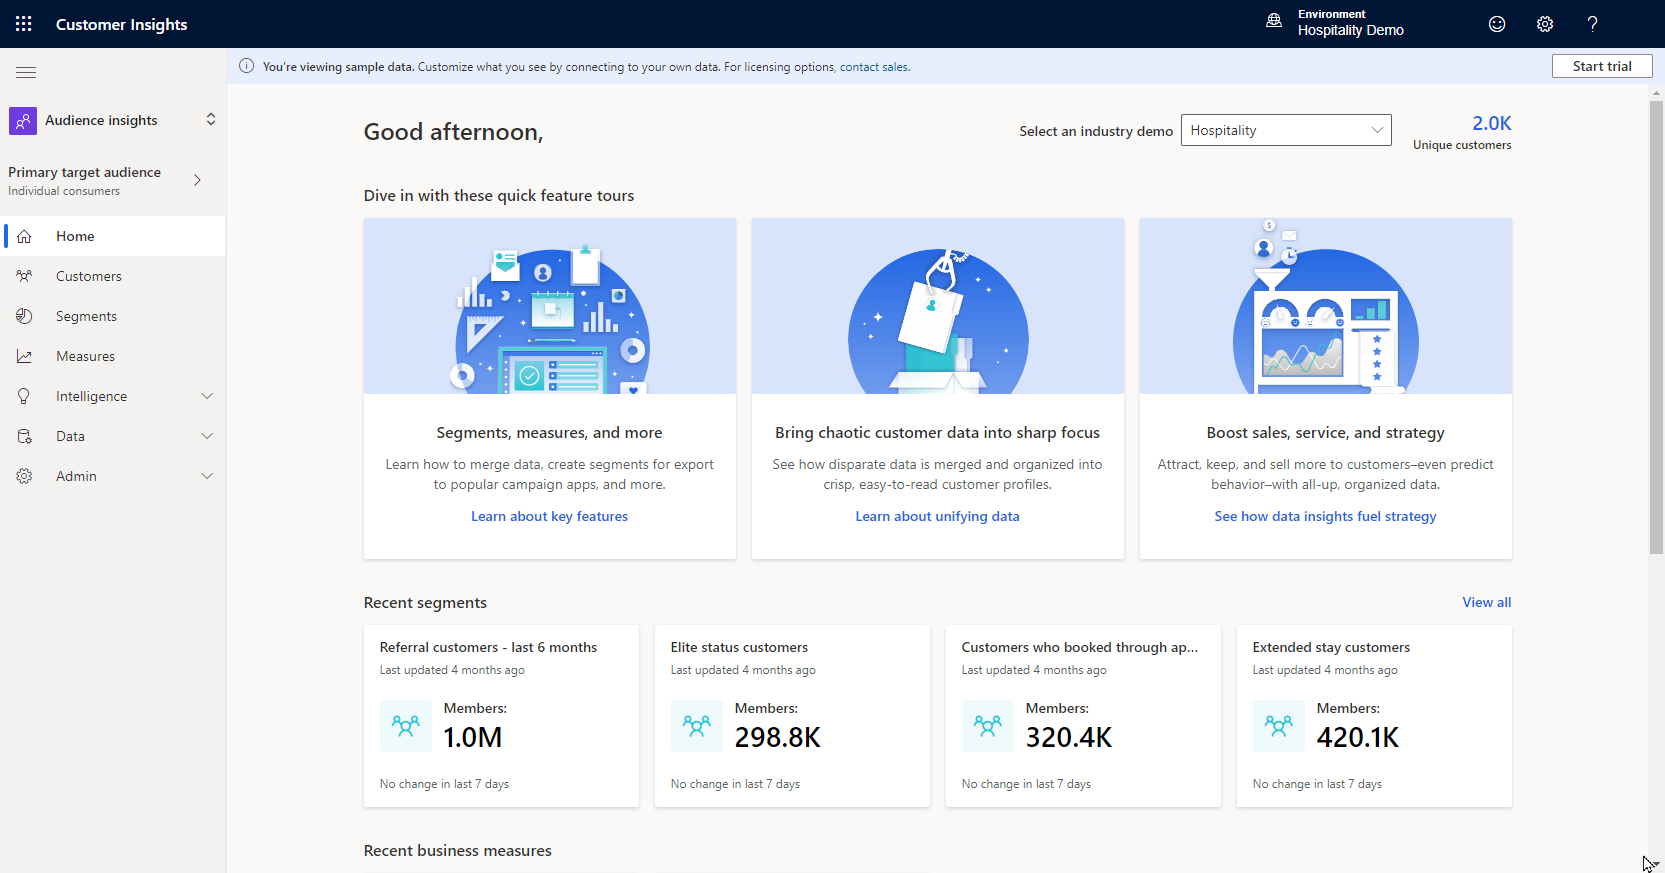 Screenshot of the Customer Insights home page.